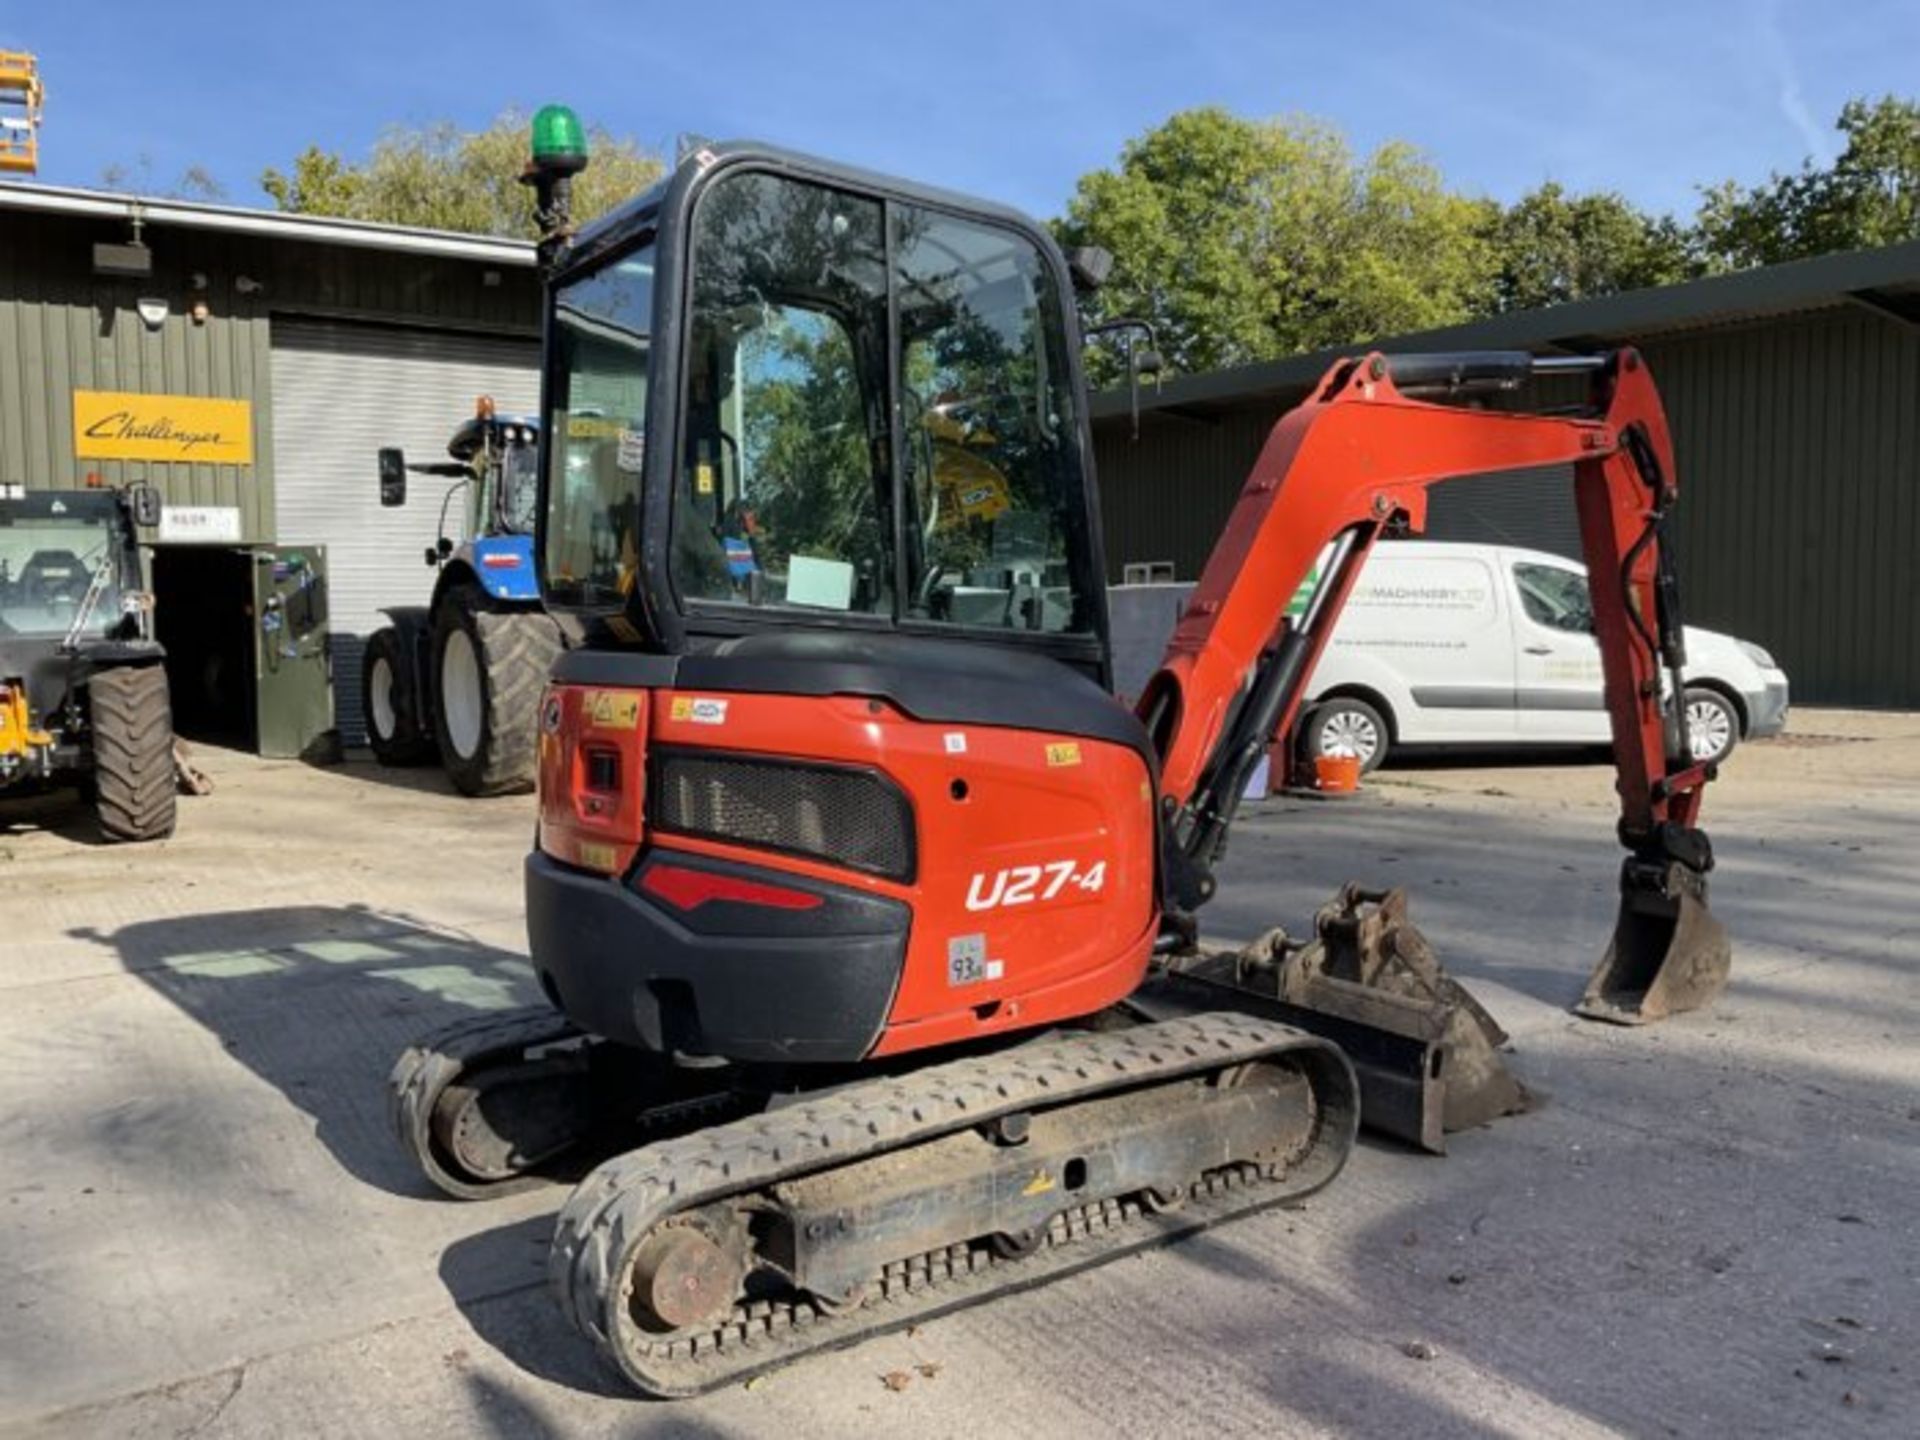 KUBOTA U27-4. RUBBER TRACKS. PIPED. FRONT BLADE. 3 BUCKETS. QUICK HITCH. 2 SPEED TRACKING. - Image 6 of 9